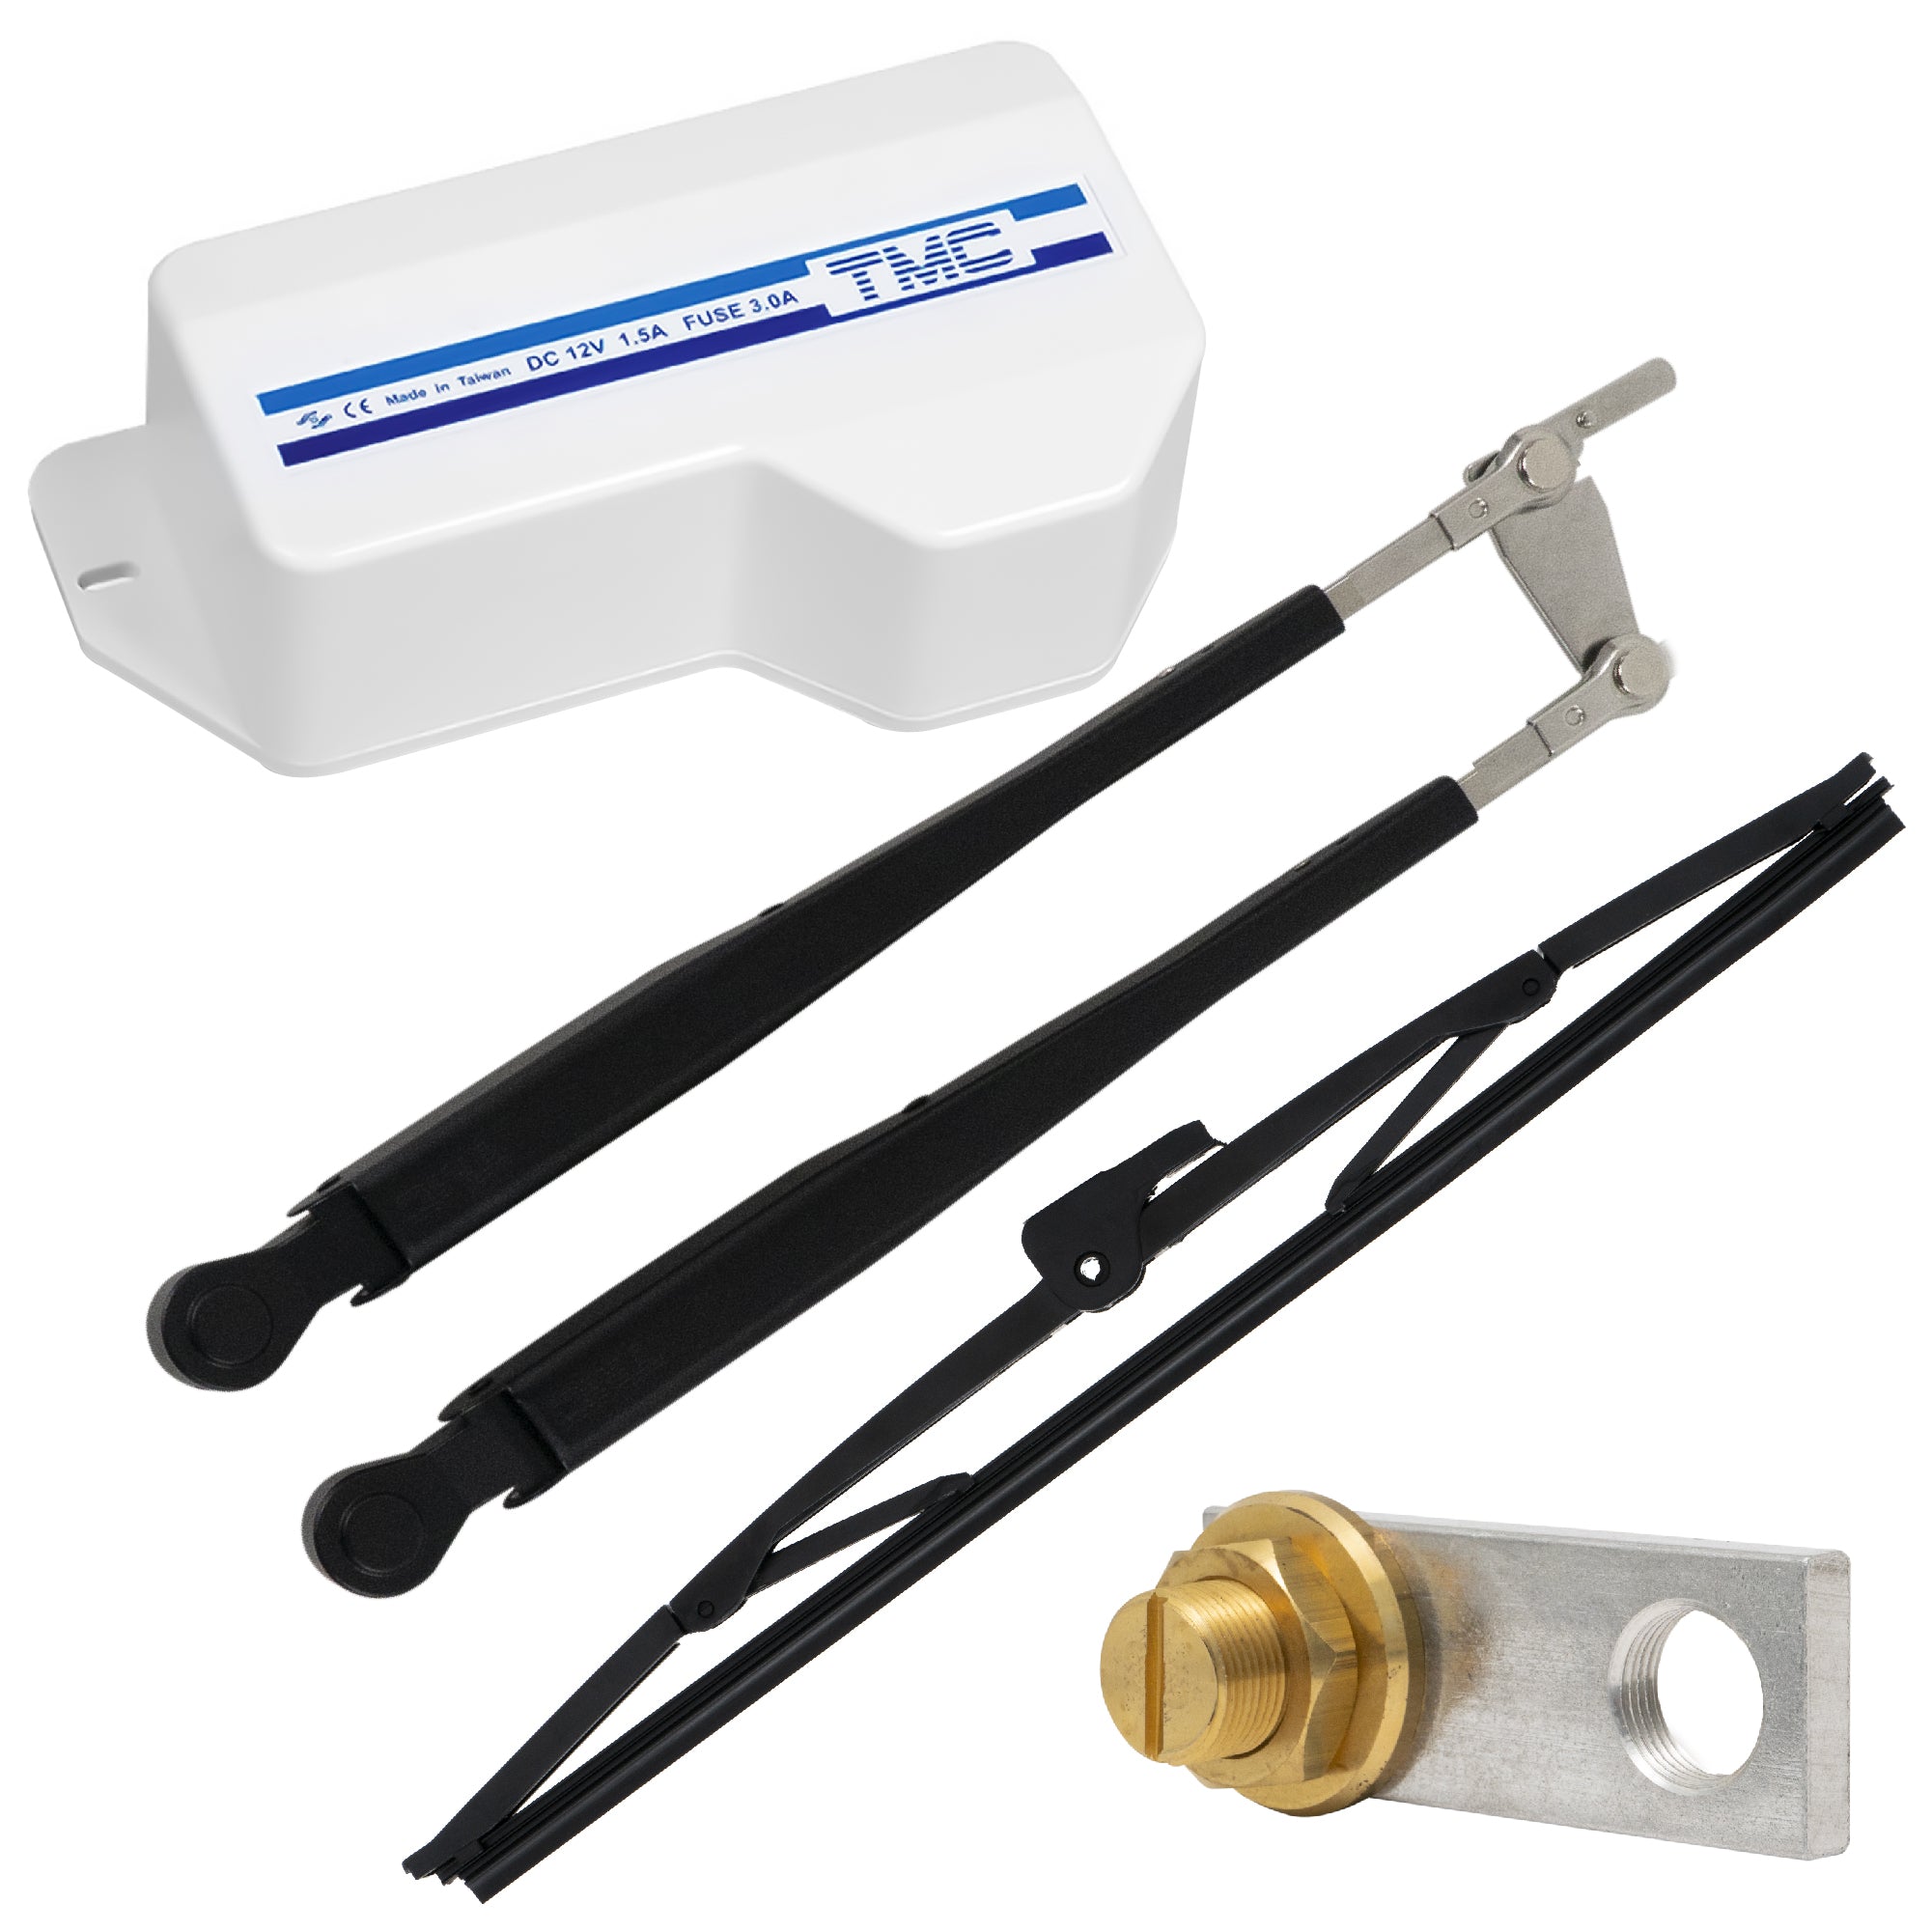 TMC Complete Windshield System Kit  - FO746-C6